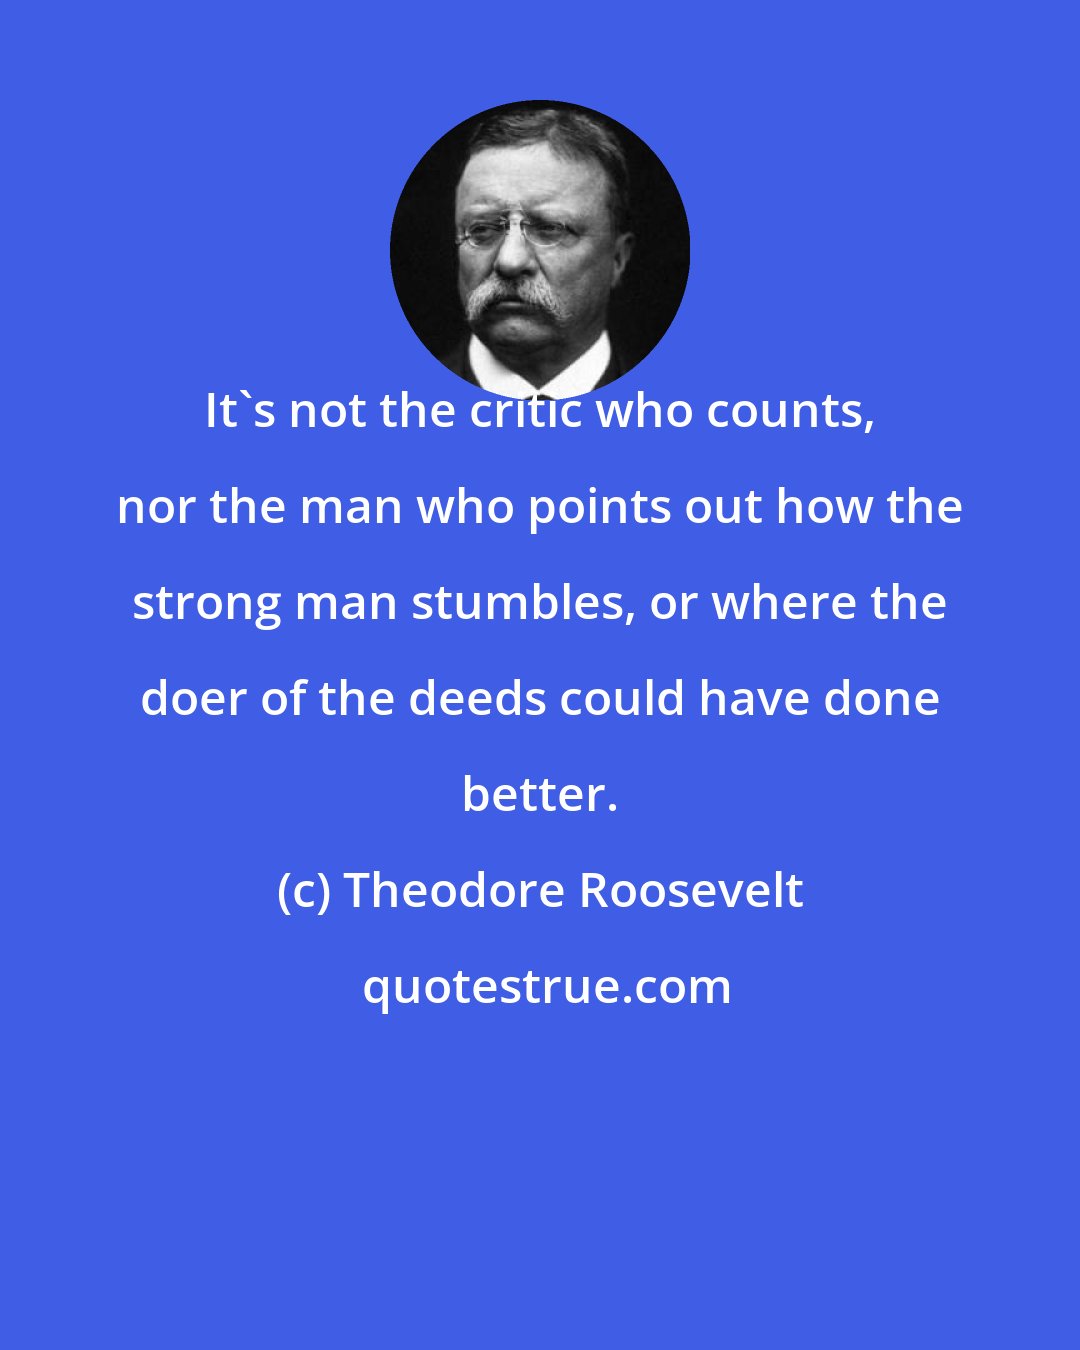 Theodore Roosevelt: It's not the critic who counts, nor the man who points out how the strong man stumbles, or where the doer of the deeds could have done better.